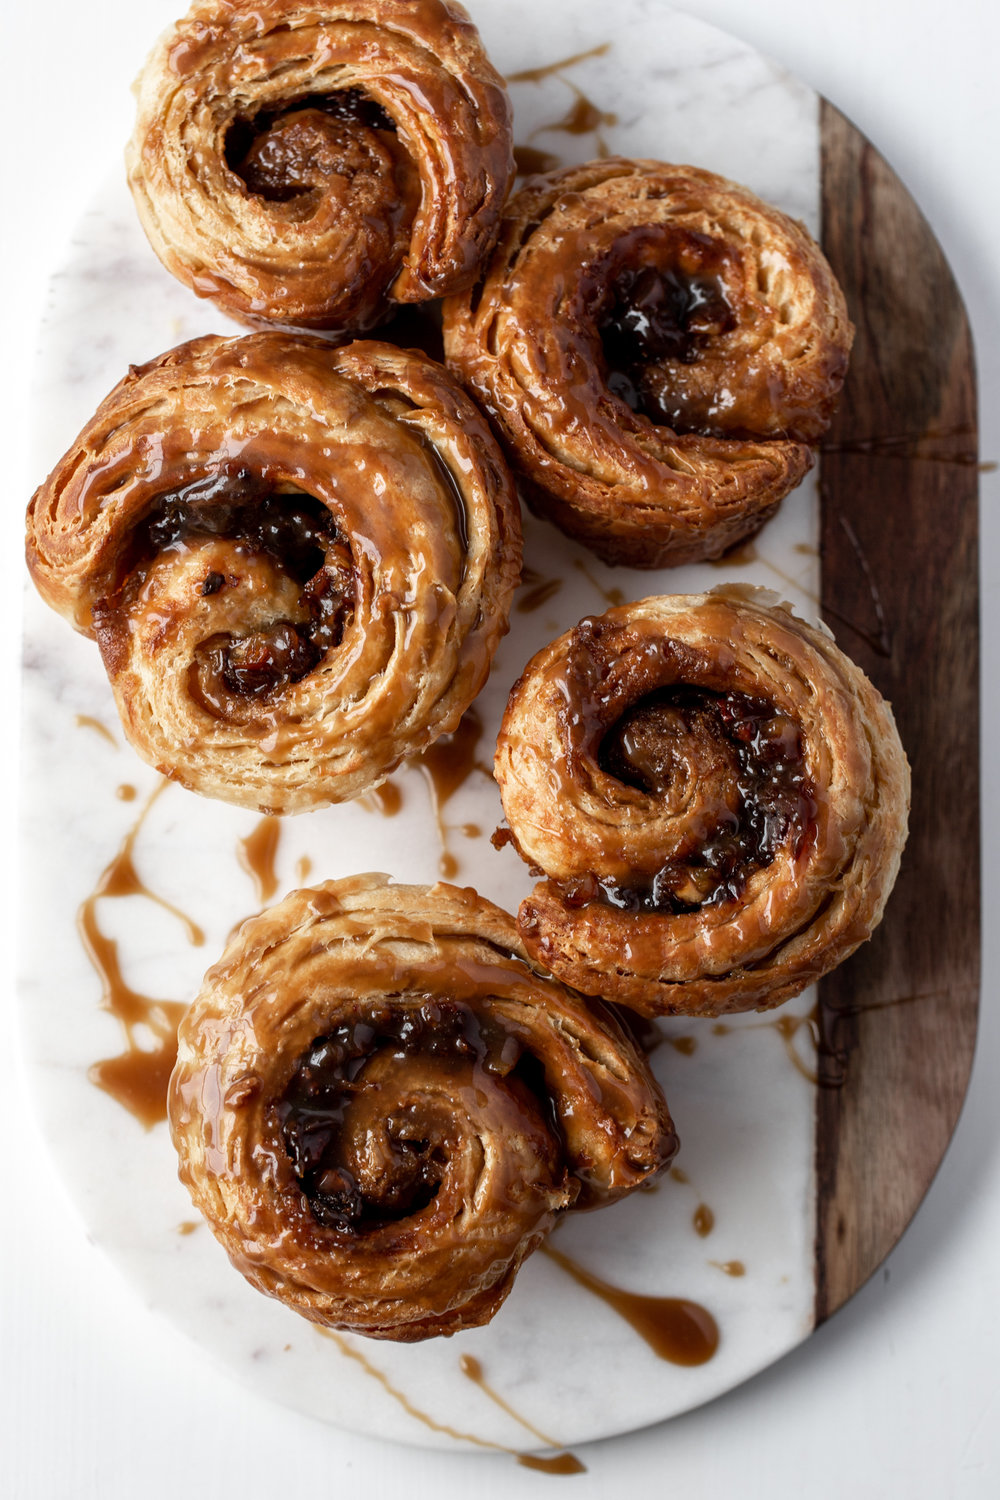 In this morning bun recipe inspired by sticky toffee pudding, croissant dough is stuffed with filling made with dates & baked in muffin tins.